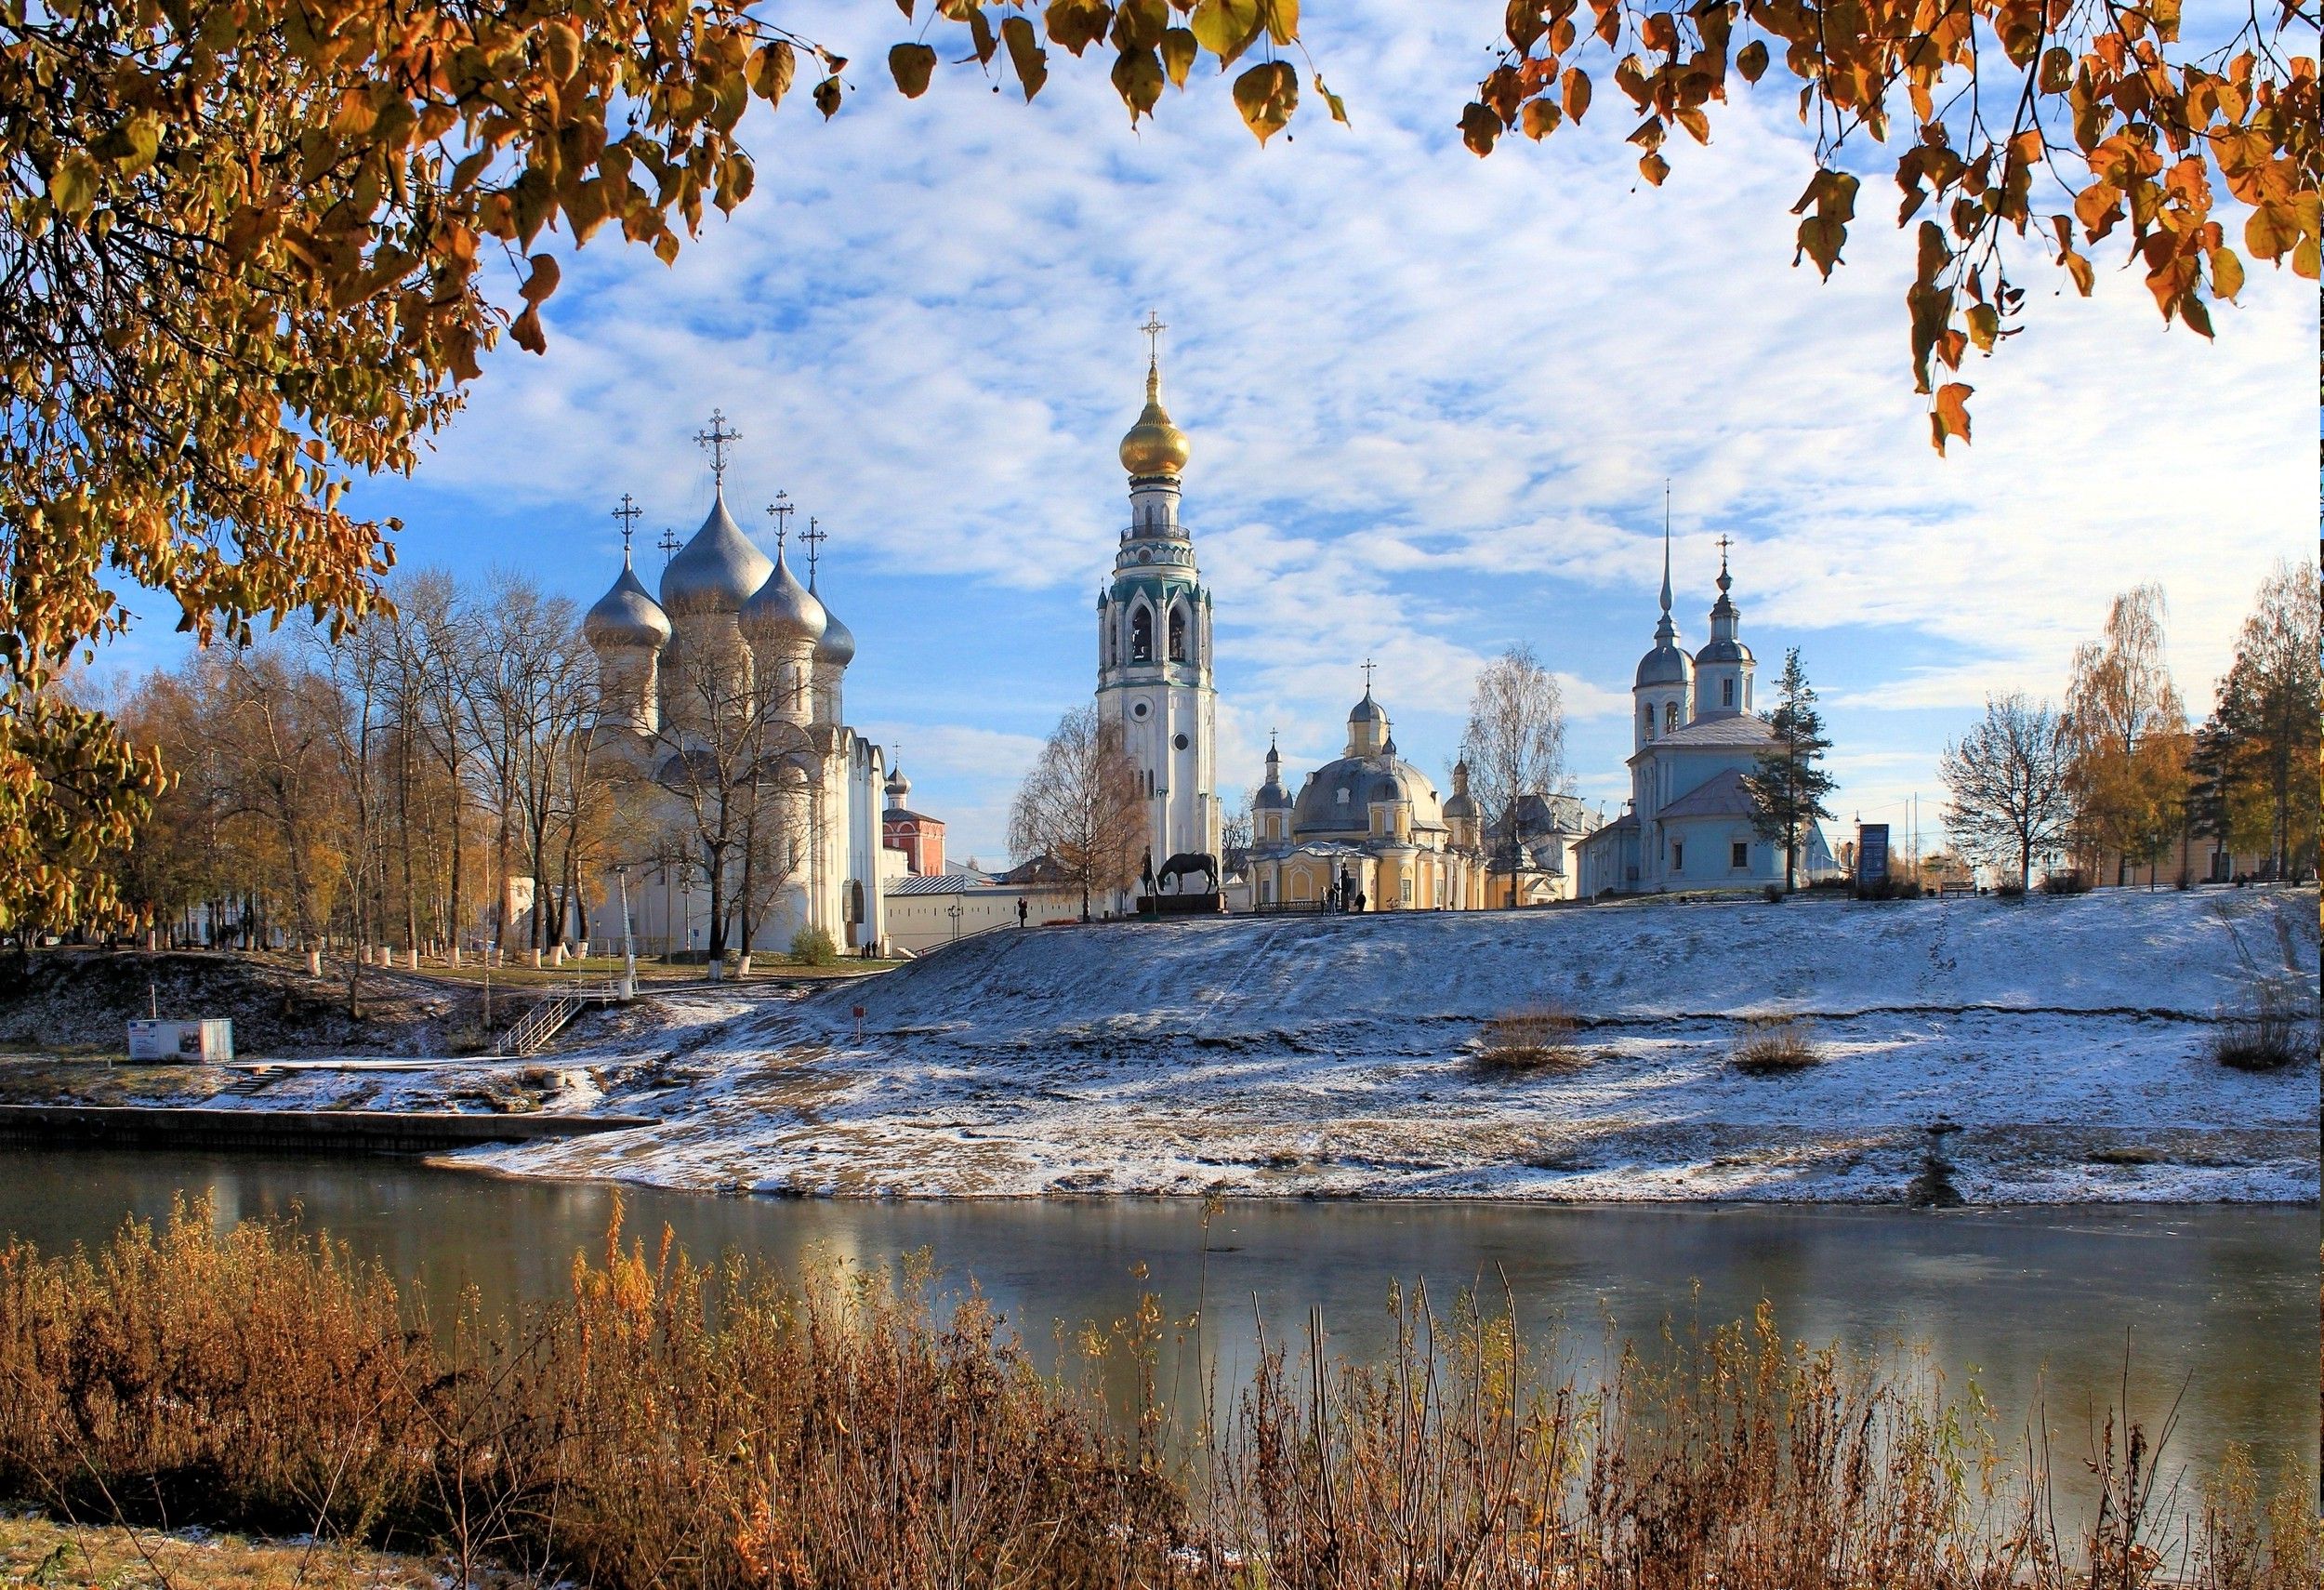 nature, Landscape, Architecture, Clouds, Water, Trees, Russia, Winter, Snow, River, Church, Tower, Leaves, Cross Wallpaper HD / Desktop and Mobile Background